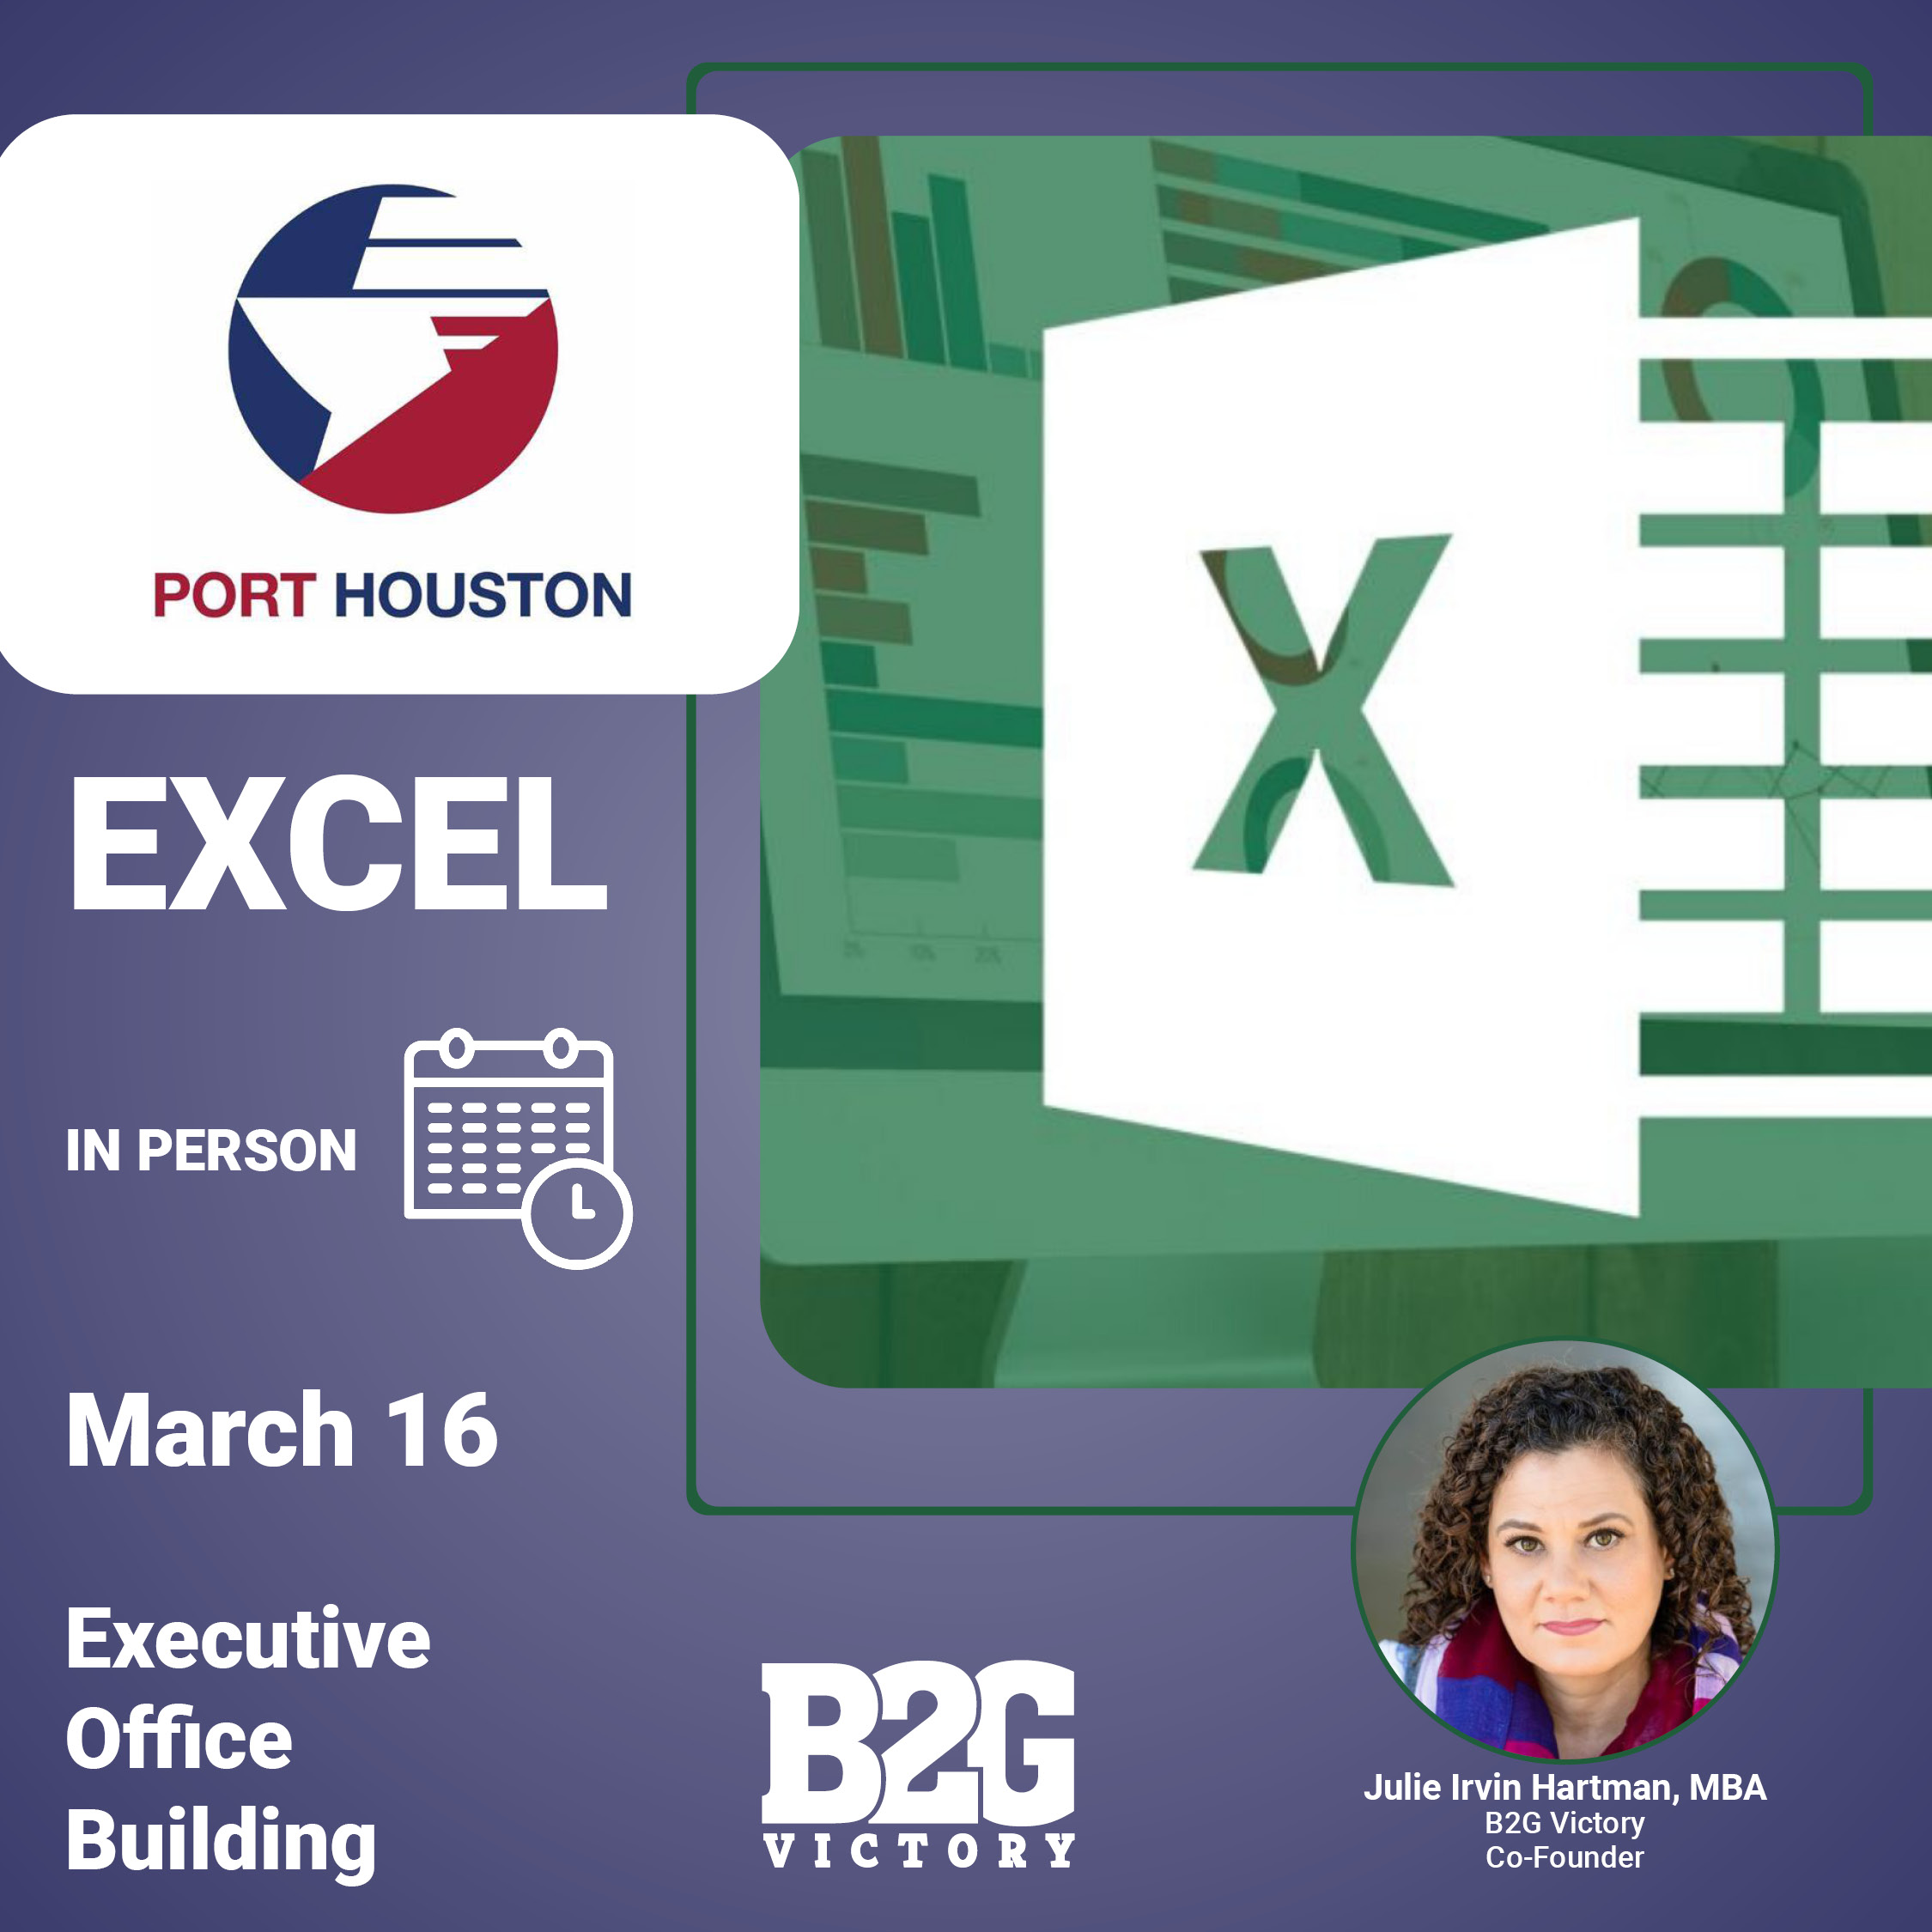 Port Houston Excel Training March 16